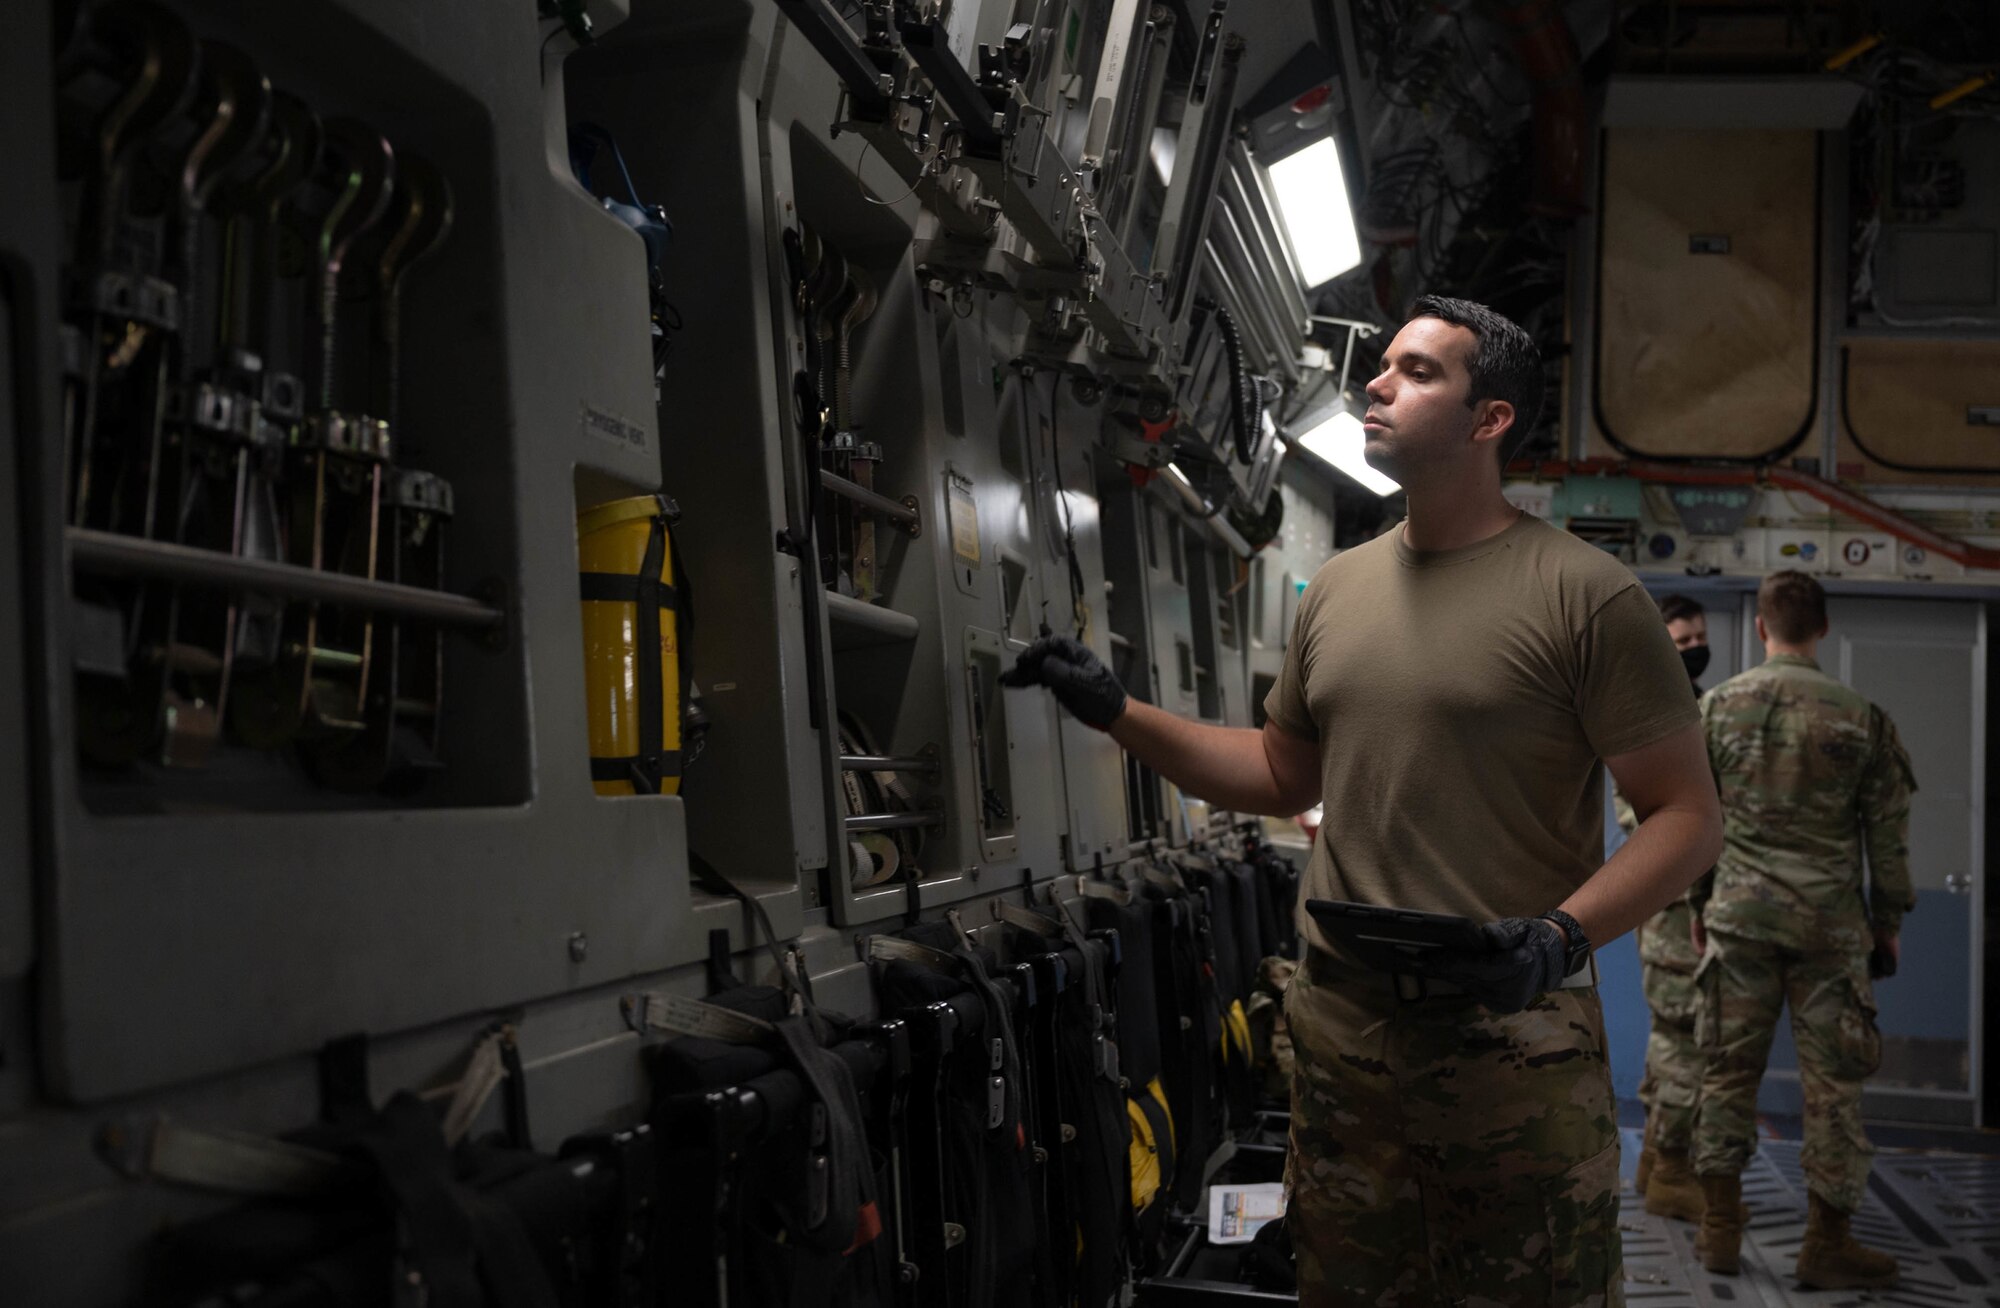 Staff Sgt. Scott Ackerly, 3rd Airlift Squadron loadmaster, performs pre-flight checks on a C-17 Globemaster III before a local training flight at Dover Air Force Base, Delaware, Aug. 4, 2021. The 3rd AS routinely trains to ensure aircrew operational readiness to support global operations through delivery of time-critical assets. (U.S. Air Force photo by Senior Airman Faith Schaefer)